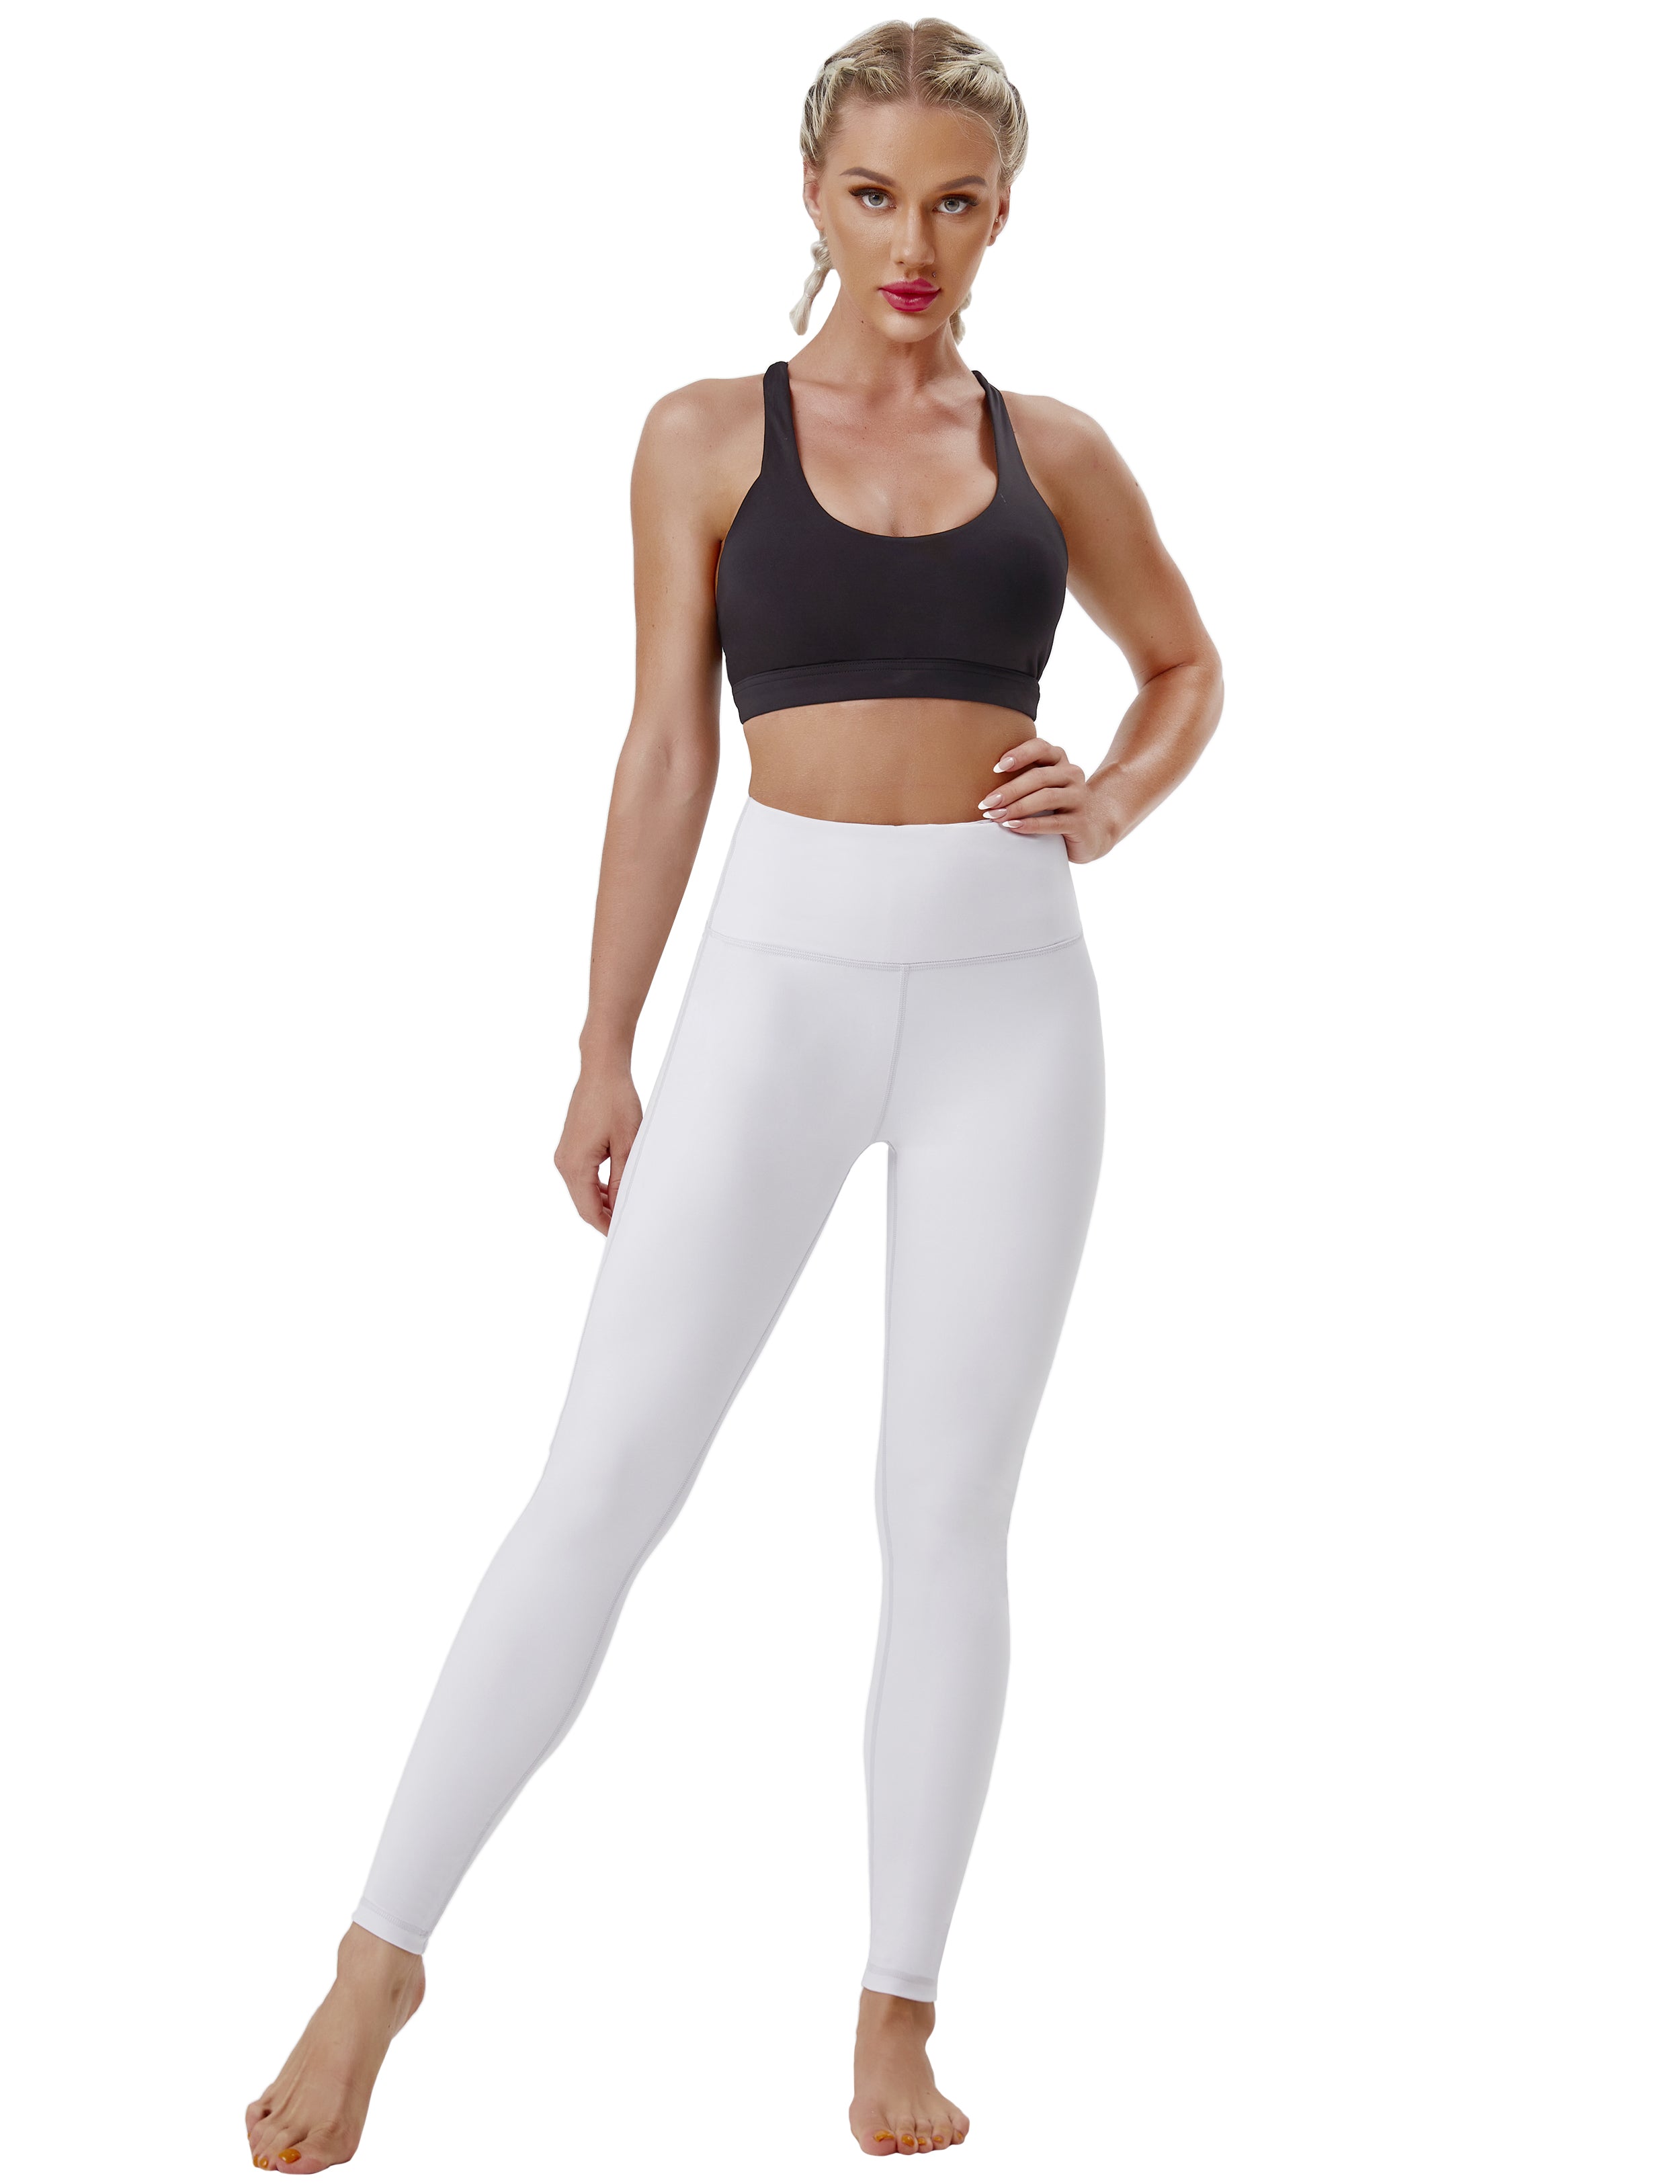 High Waist Side Line Yoga Pants lightgray Side Line is Make Your Legs Look Longer and Thinner 75%Nylon/25%Spandex Fabric doesn't attract lint easily 4-way stretch No see-through Moisture-wicking Tummy control Inner pocket Two lengths